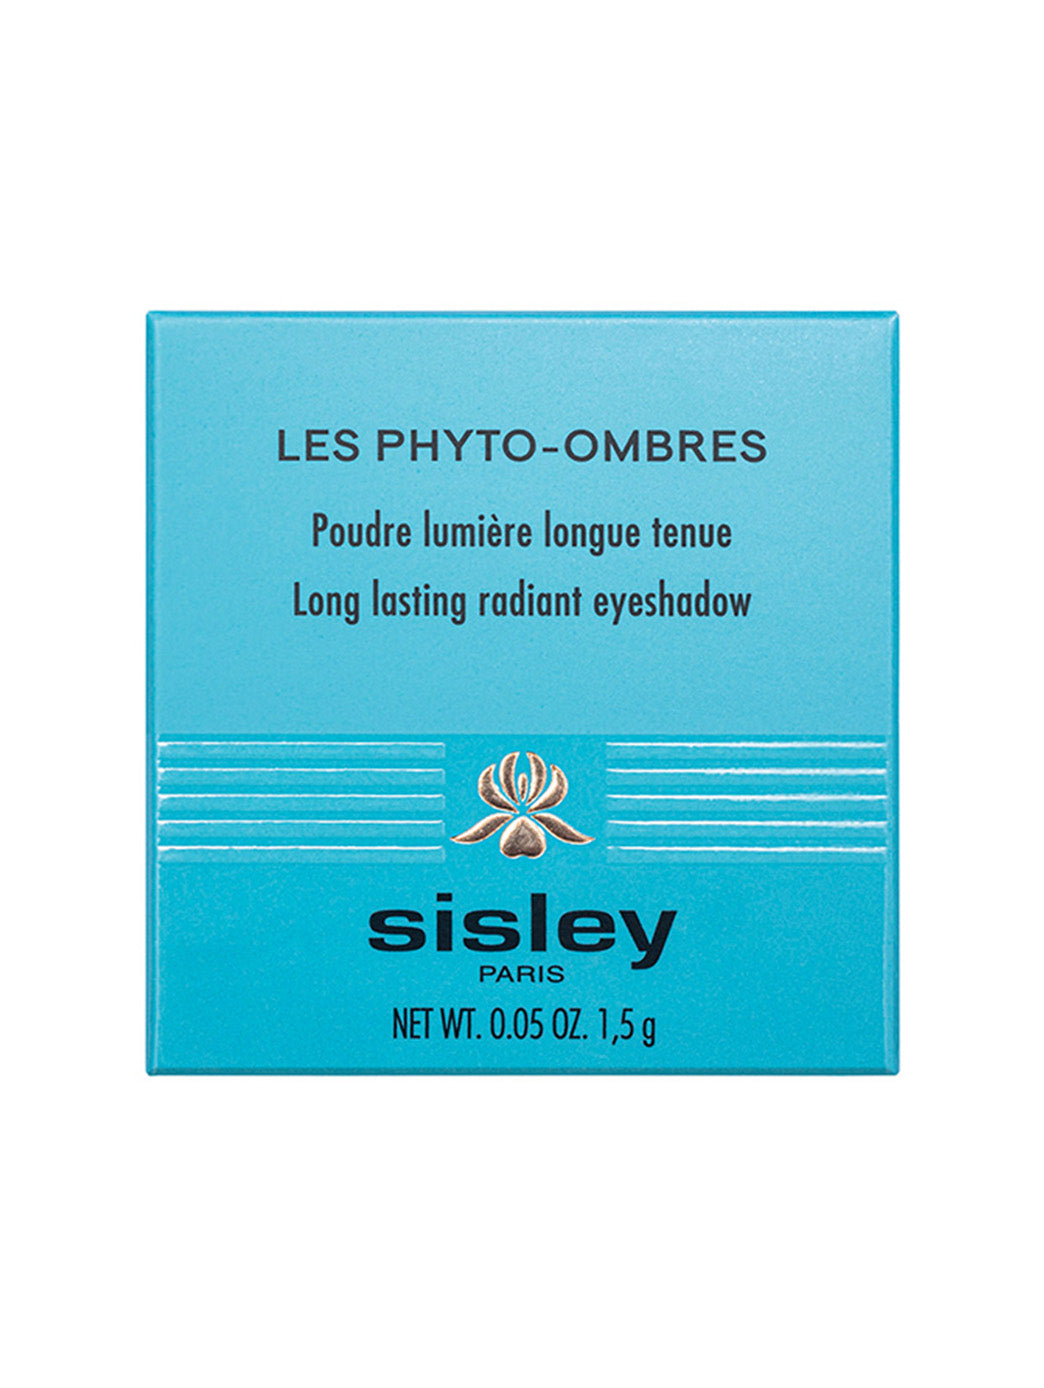 42472957313174 - Les Phyto-Ombres